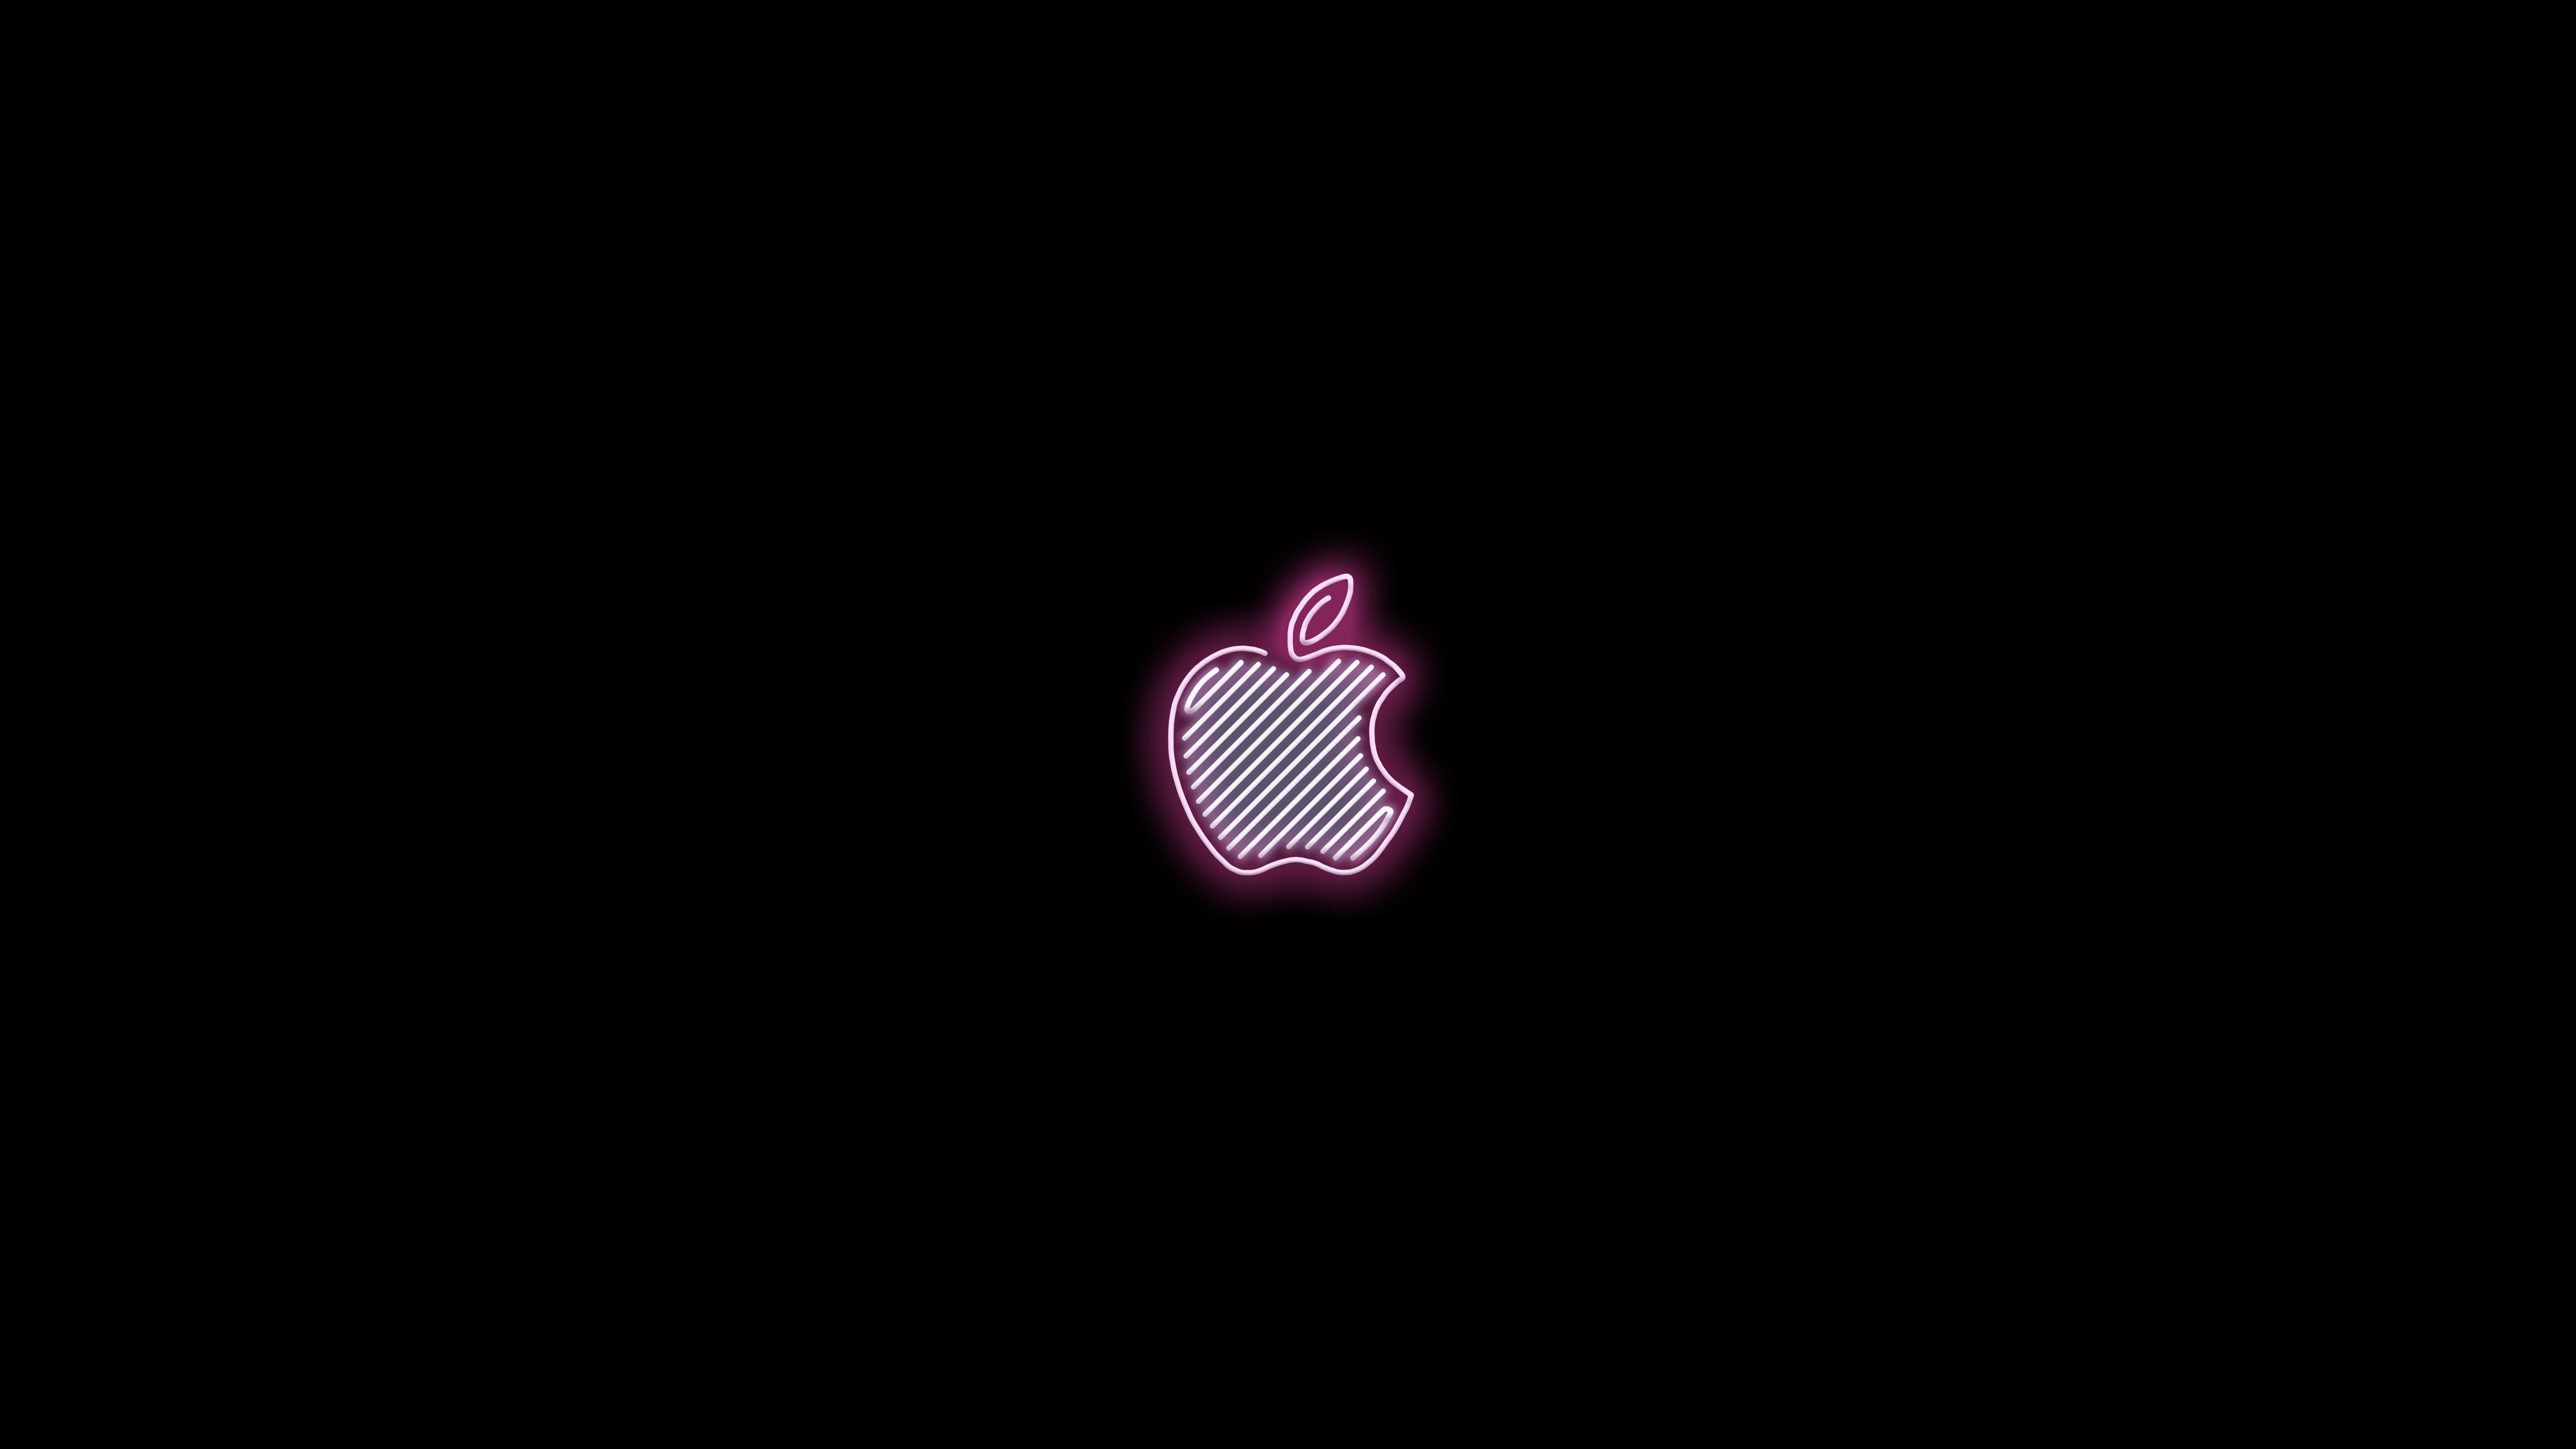 Apple Tokyo Store Inspired Neon Wallpaper For iPhone And Mac